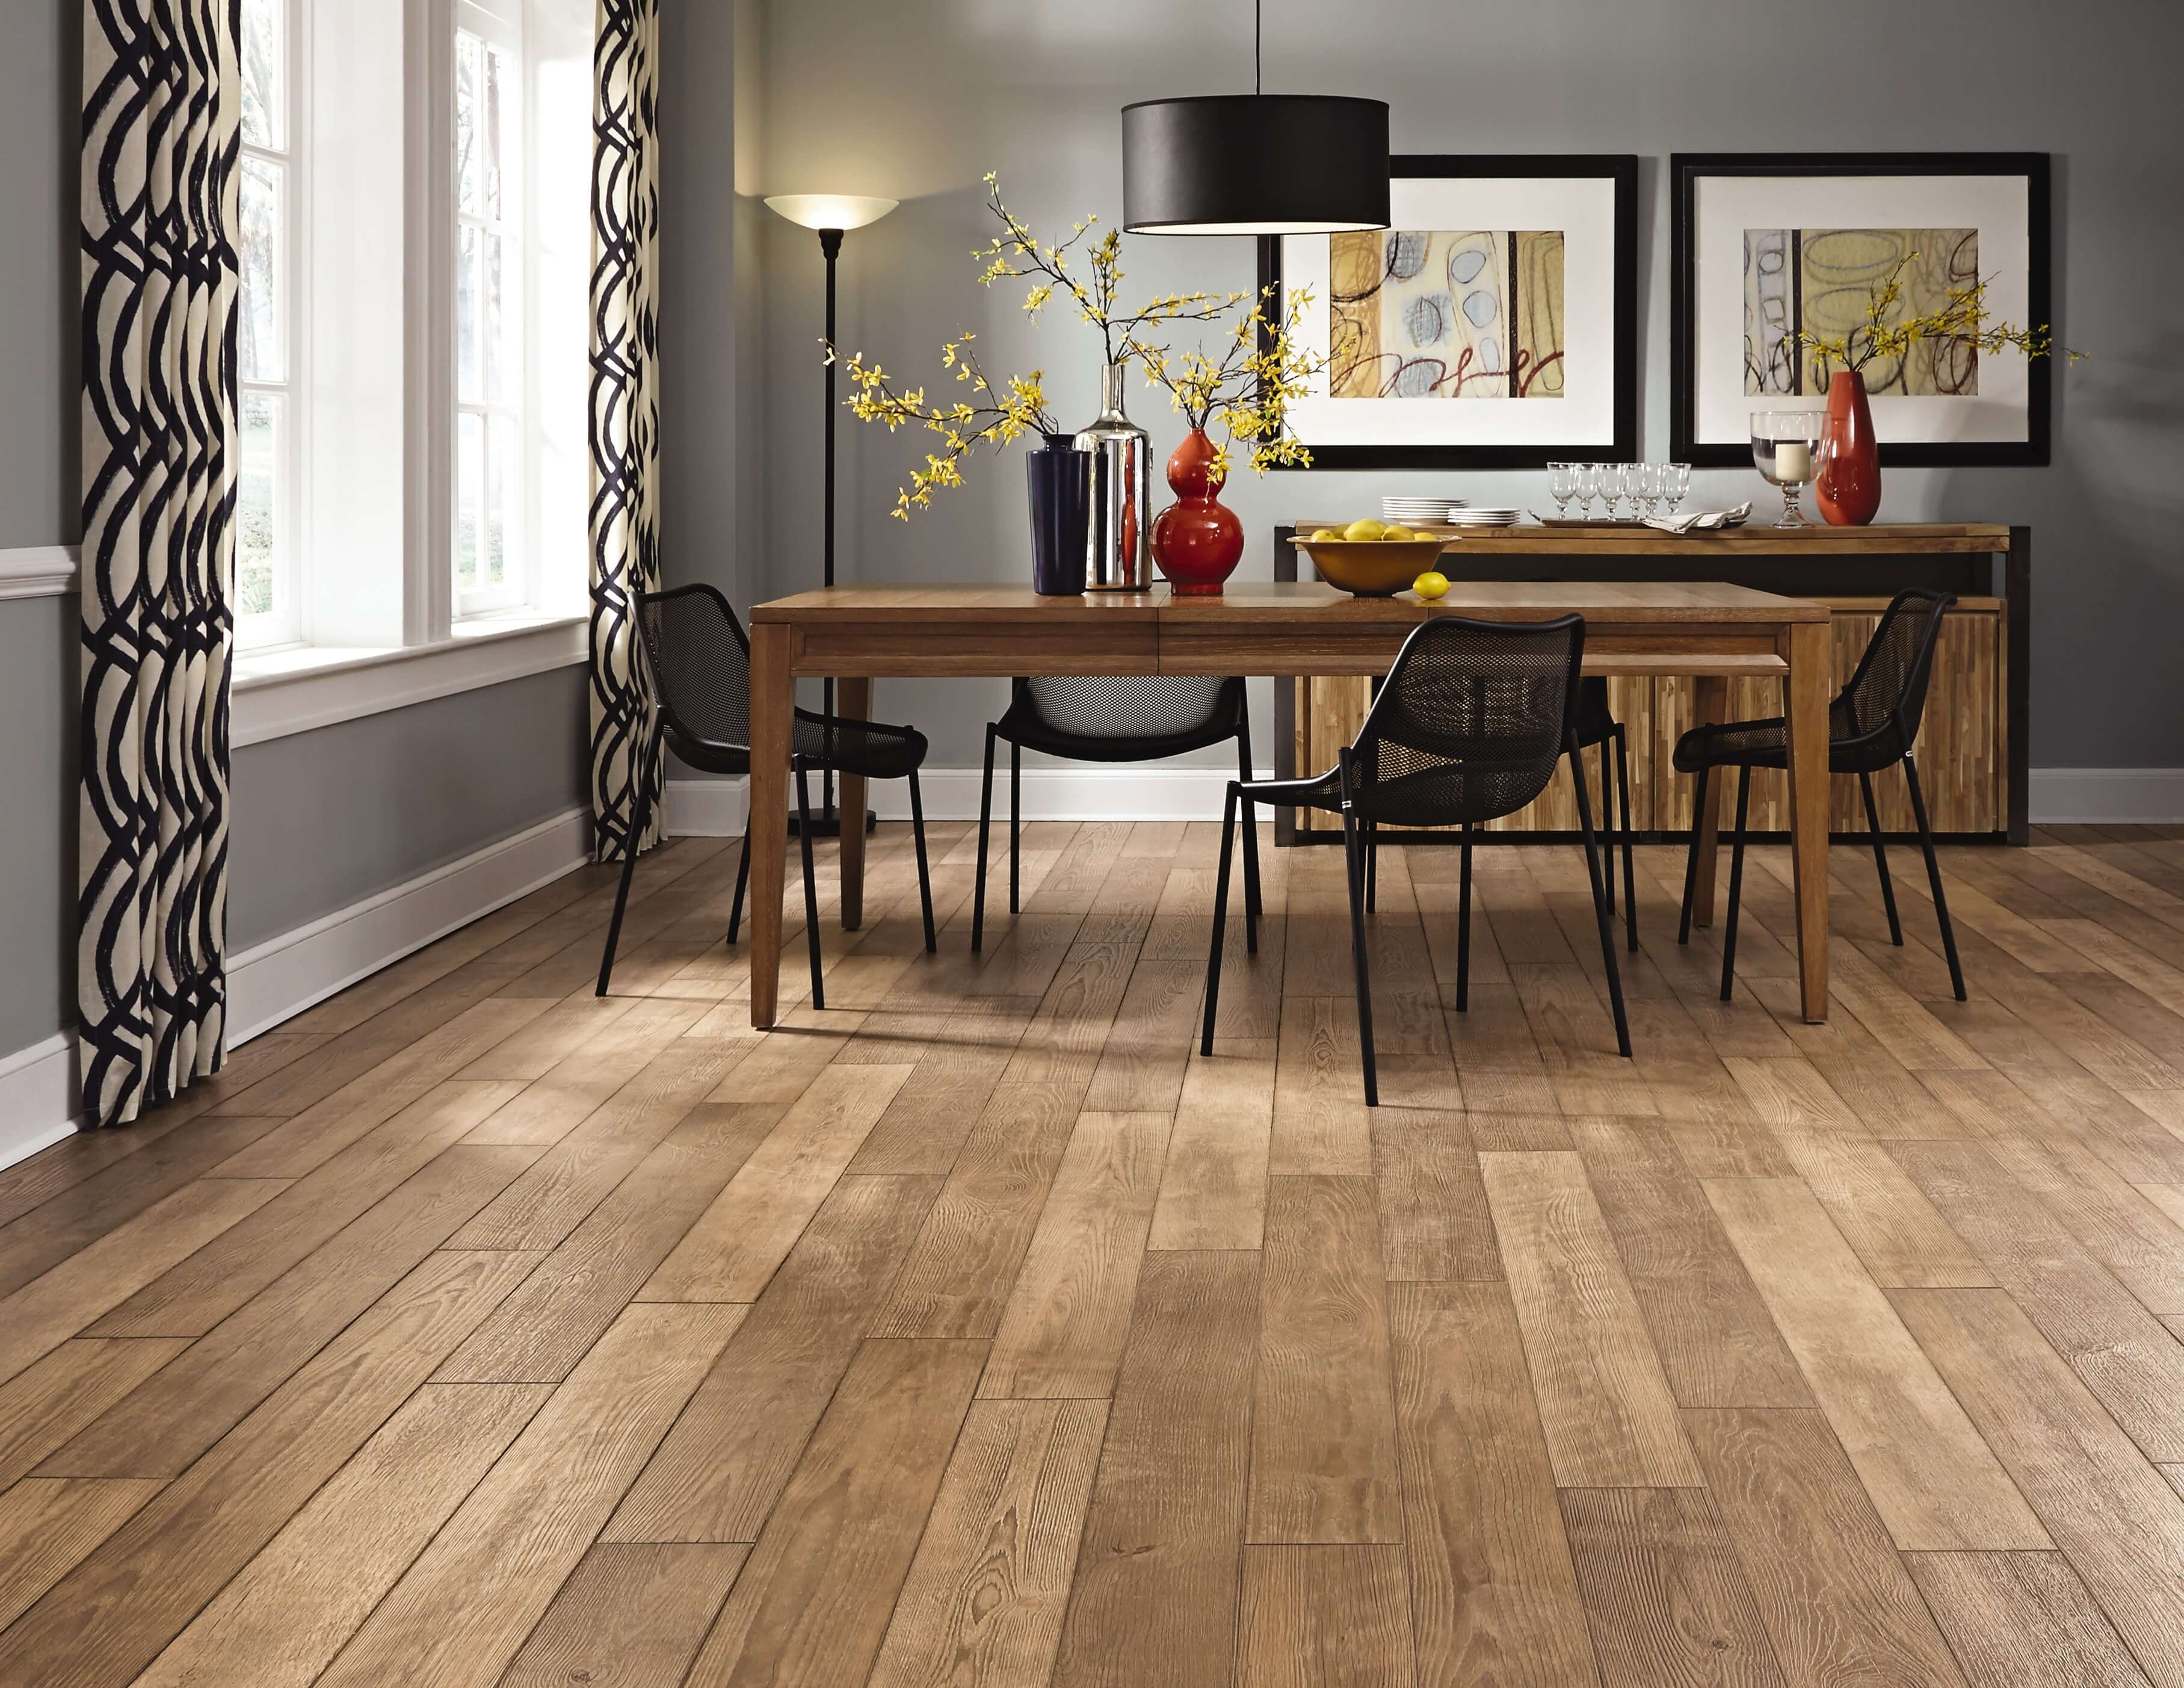 What Should You Know Before Installing Your Laminate Flooring?